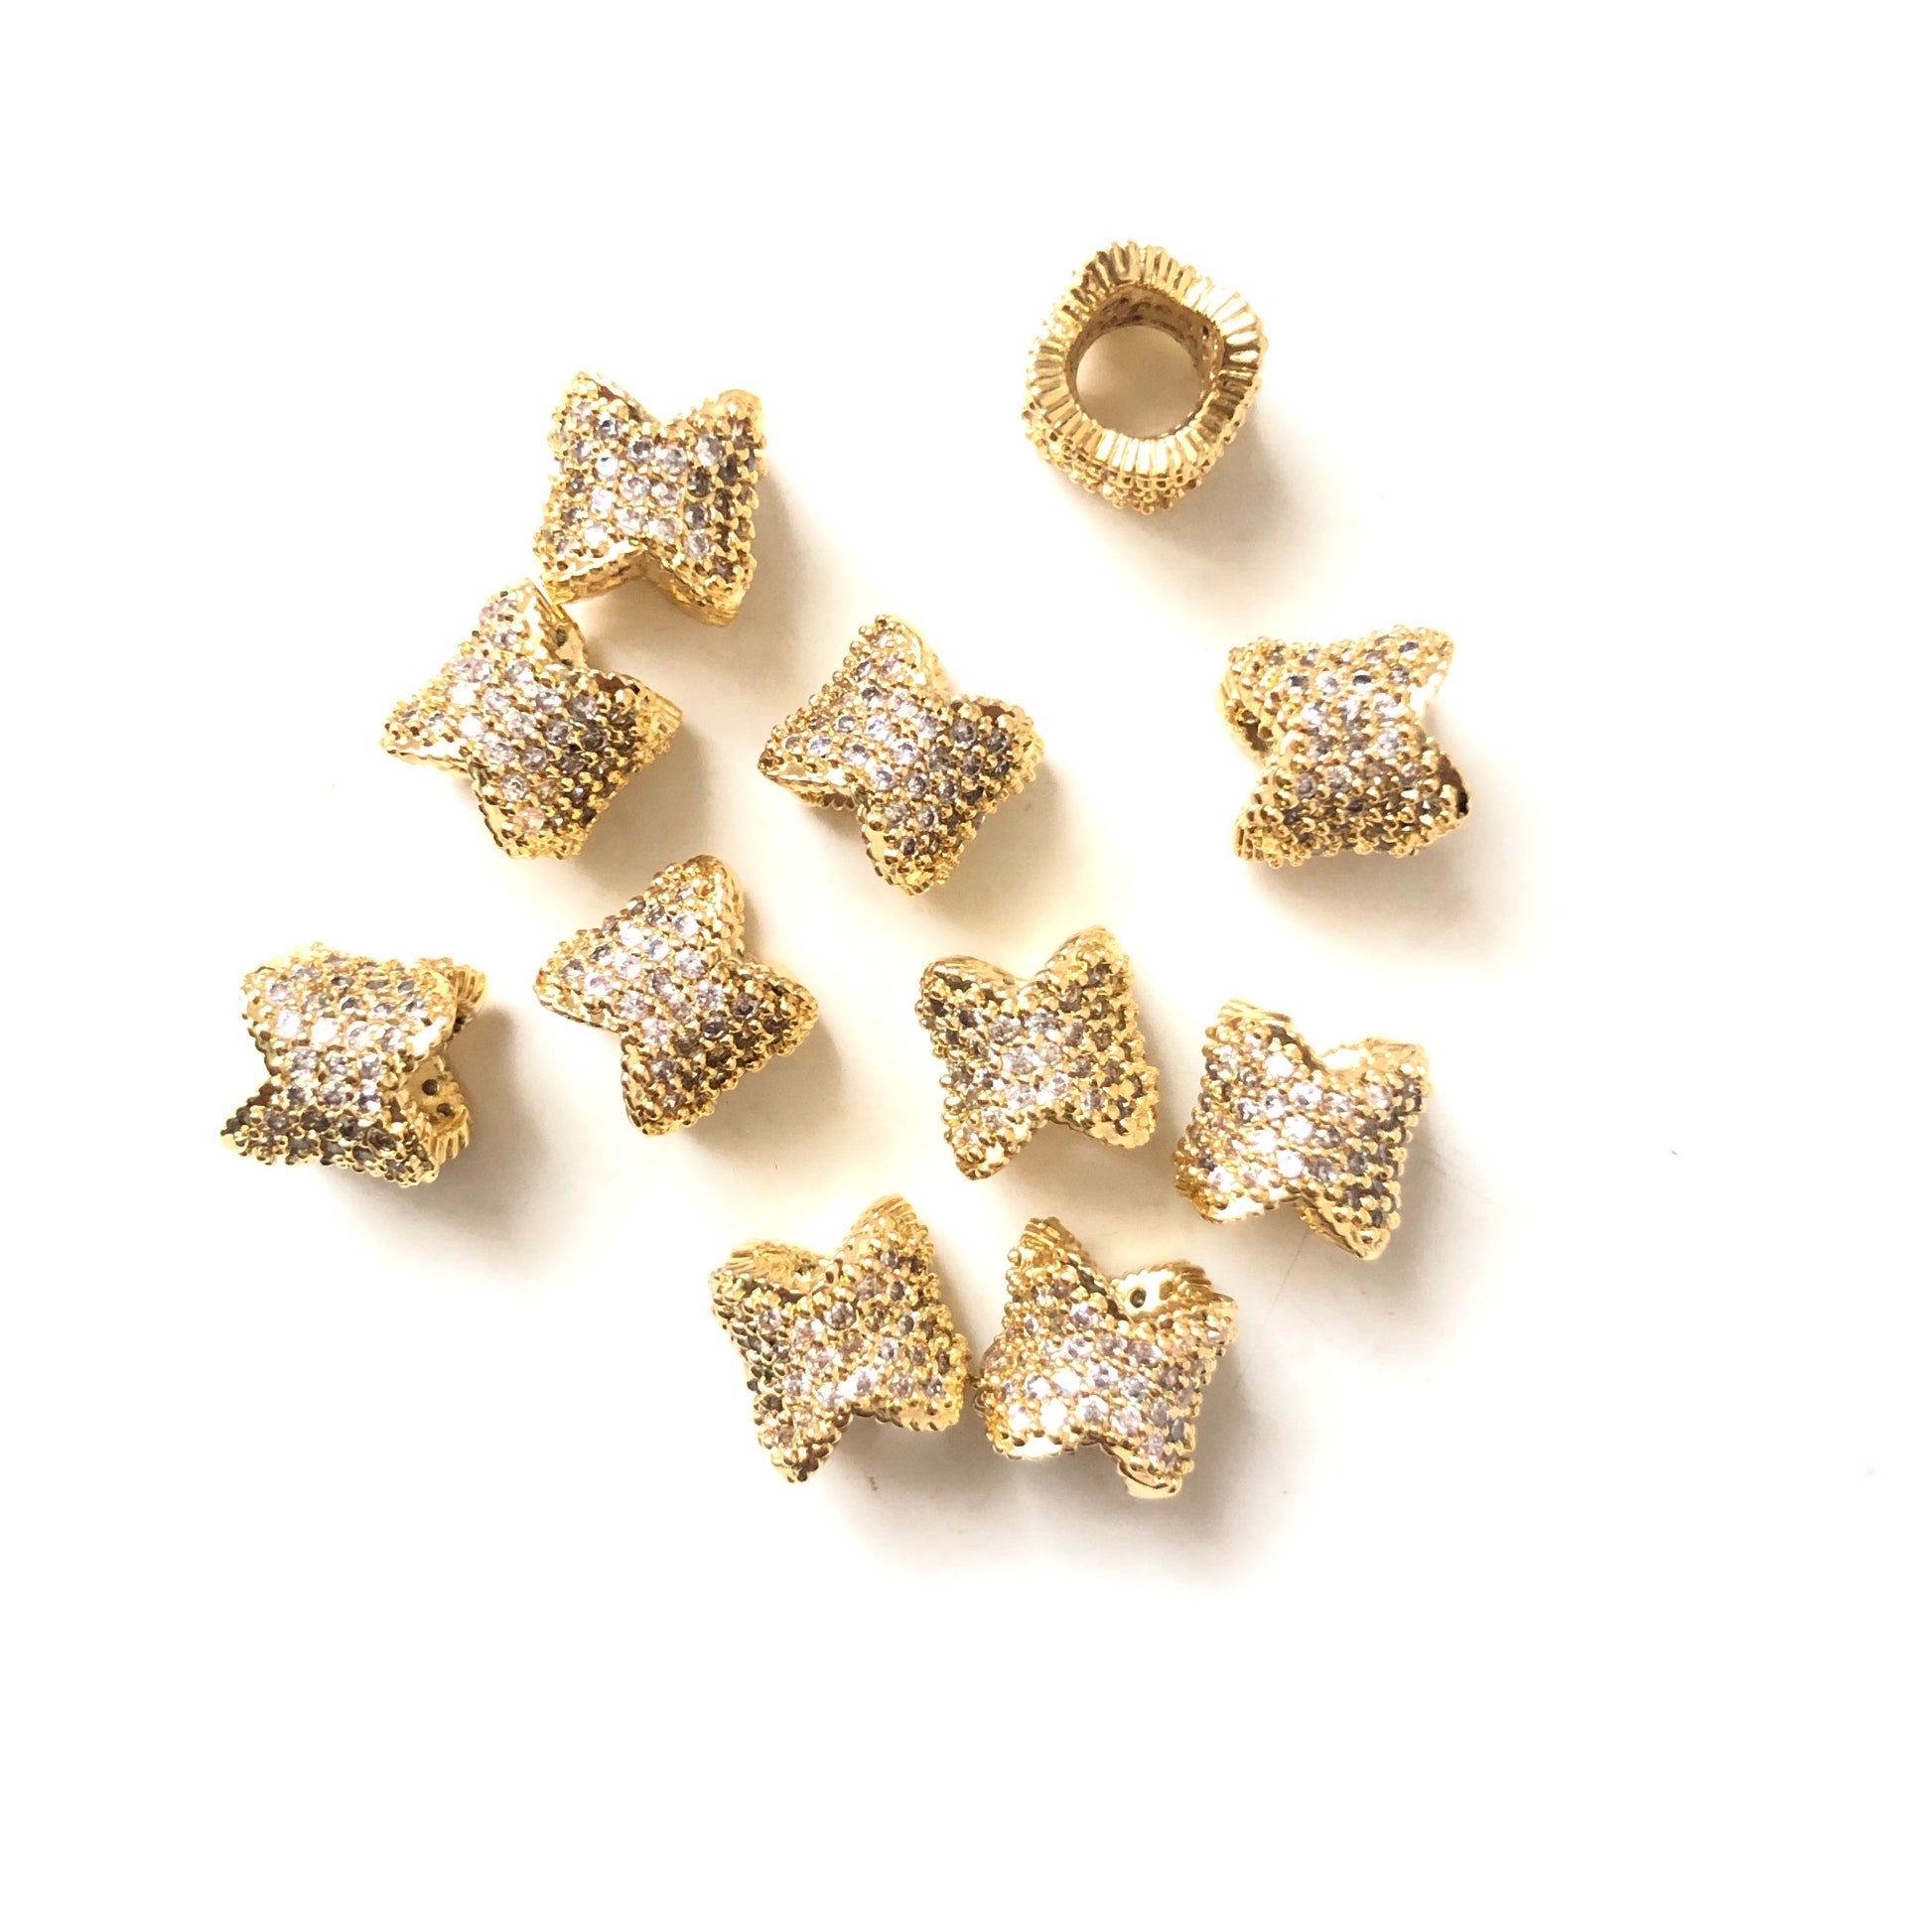 20pcs/lot 8*6.8mm CZ Paved Flower Tube Spacers Gold CZ Paved Spacers Tube Bar Centerpieces Charms Beads Beyond